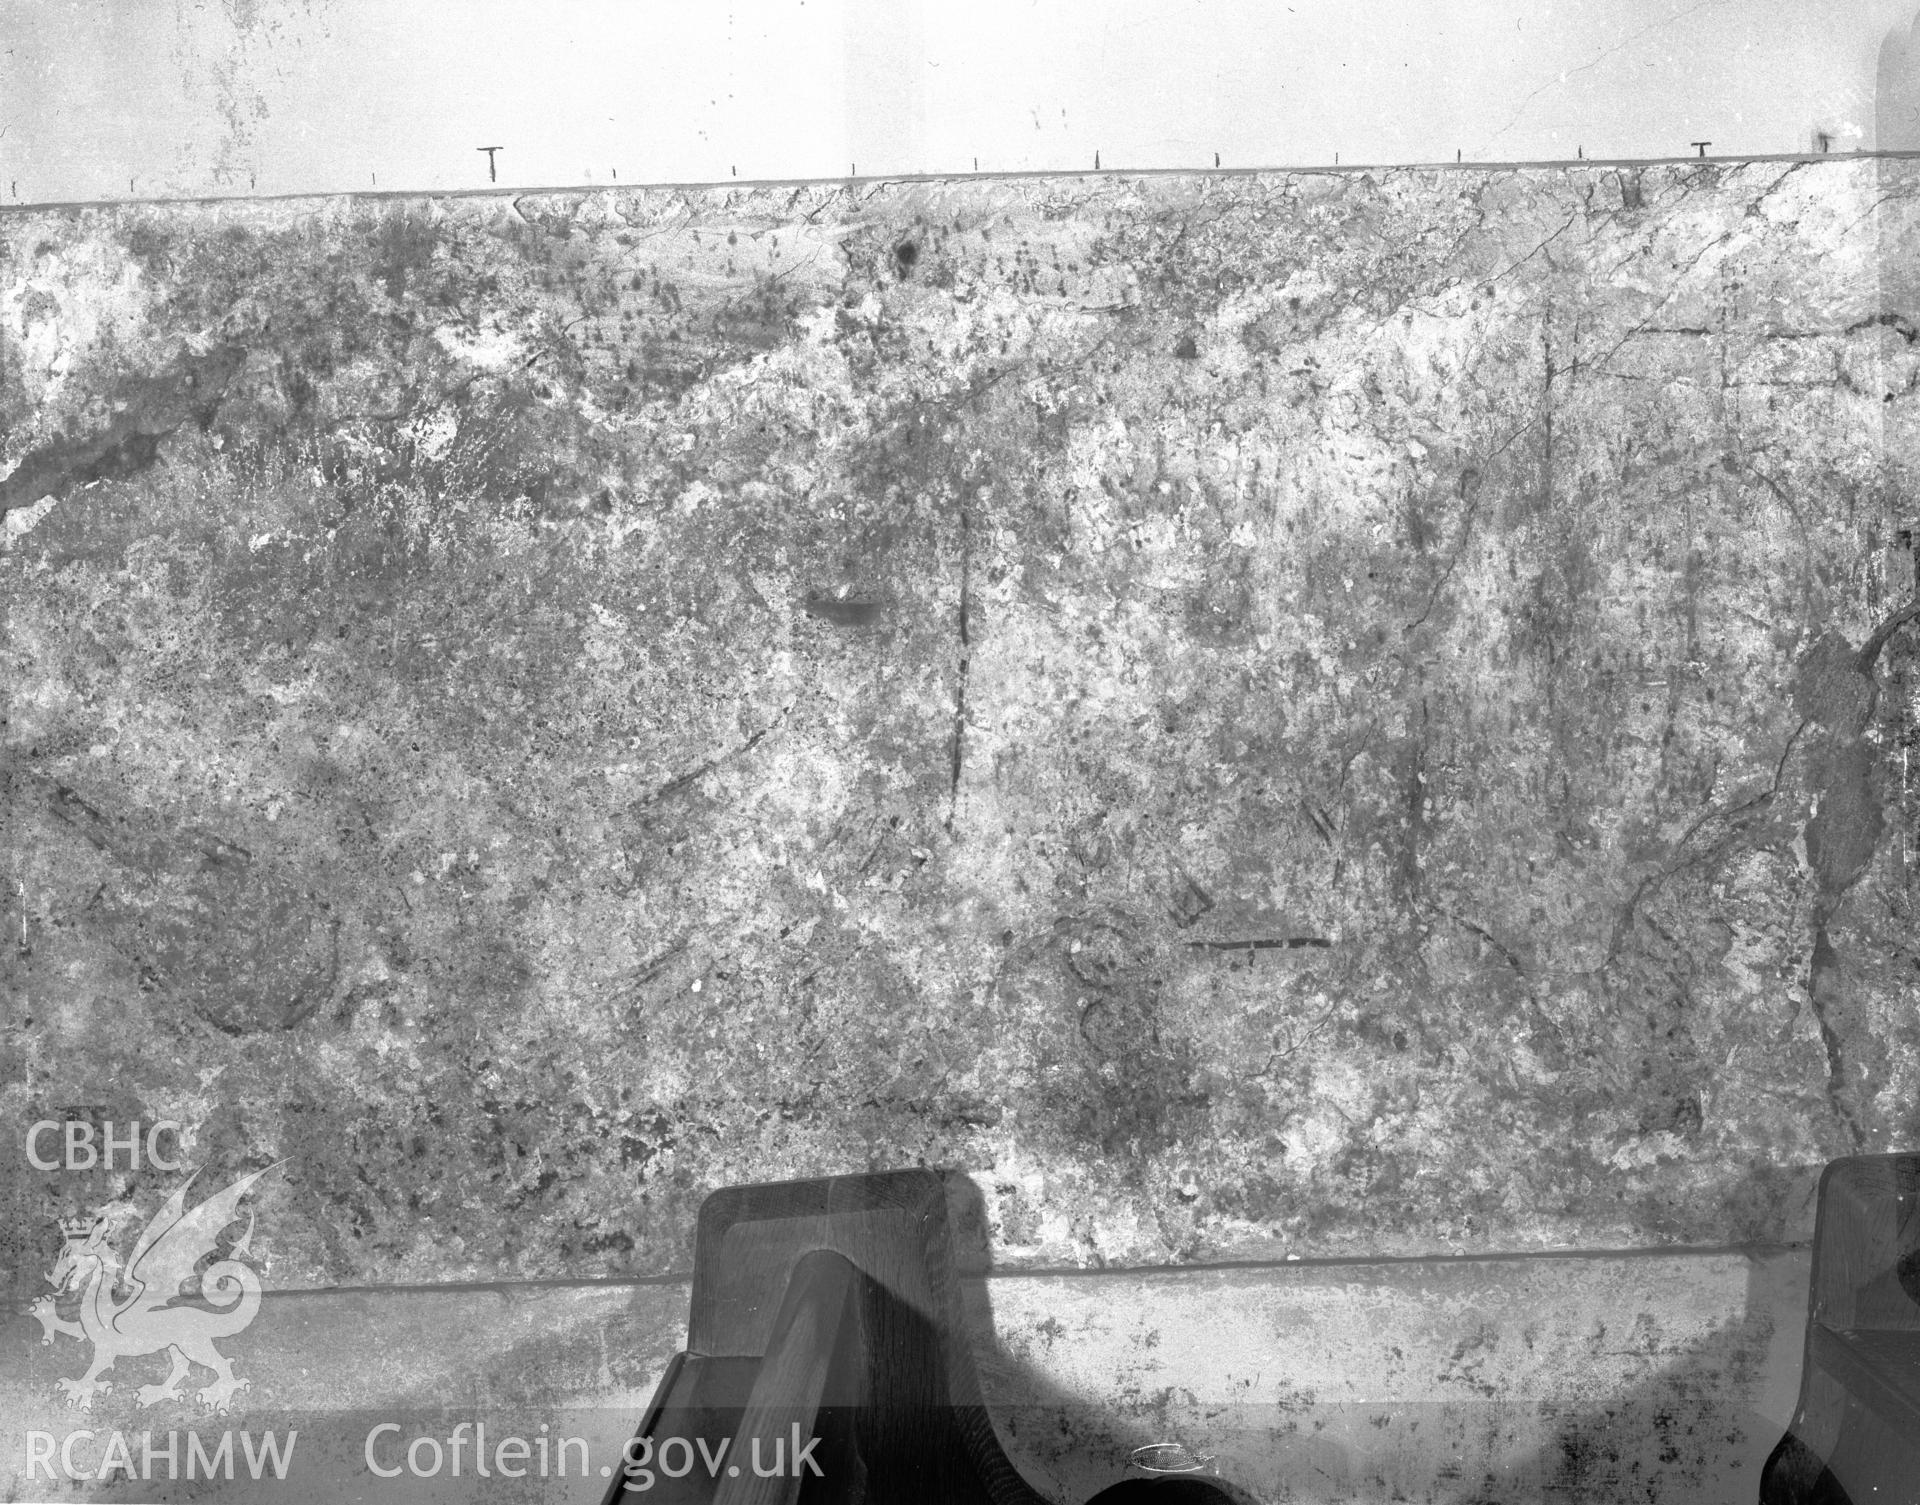 Black and white acetate negative showing interior view of Gumfreston Church.